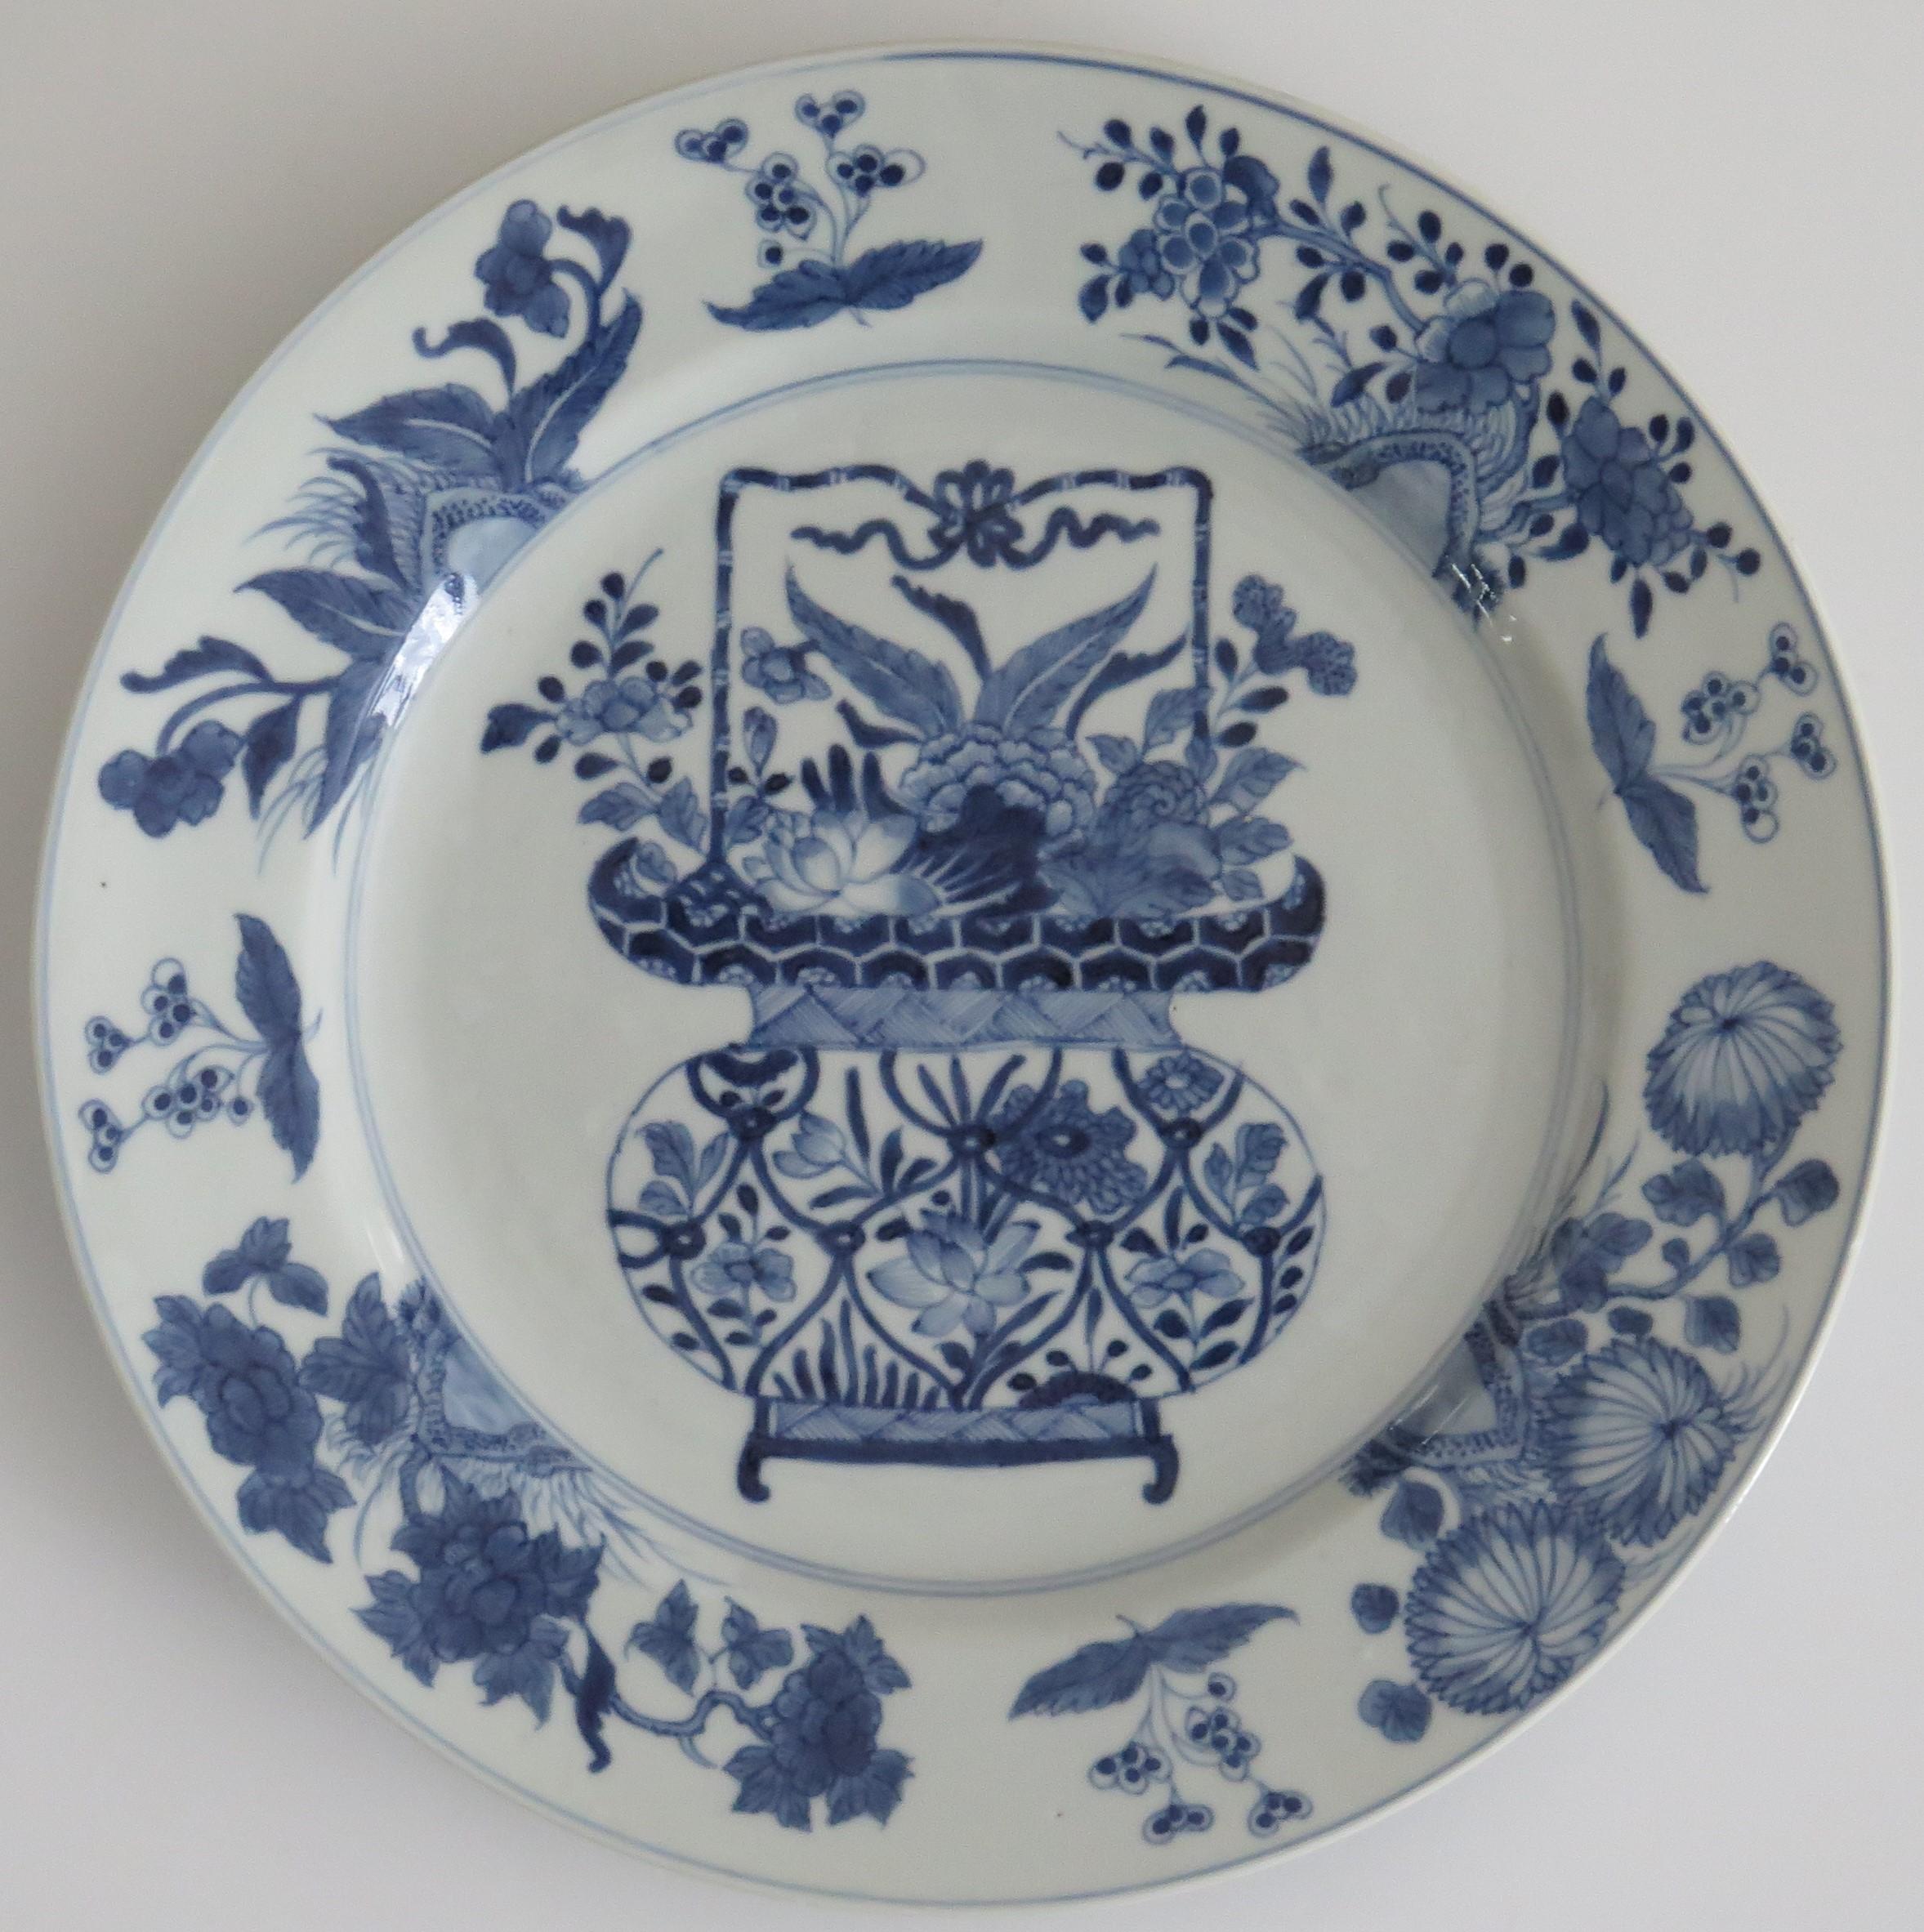 This is a beautifully hand-painted Chinese porcelain blue and white large plate or Platter, from the Qing, Kangxi period, 1662-1722.

The plate is finely potted with a carefully cut base rim and a lovely rich glassy, very light blue glaze and very